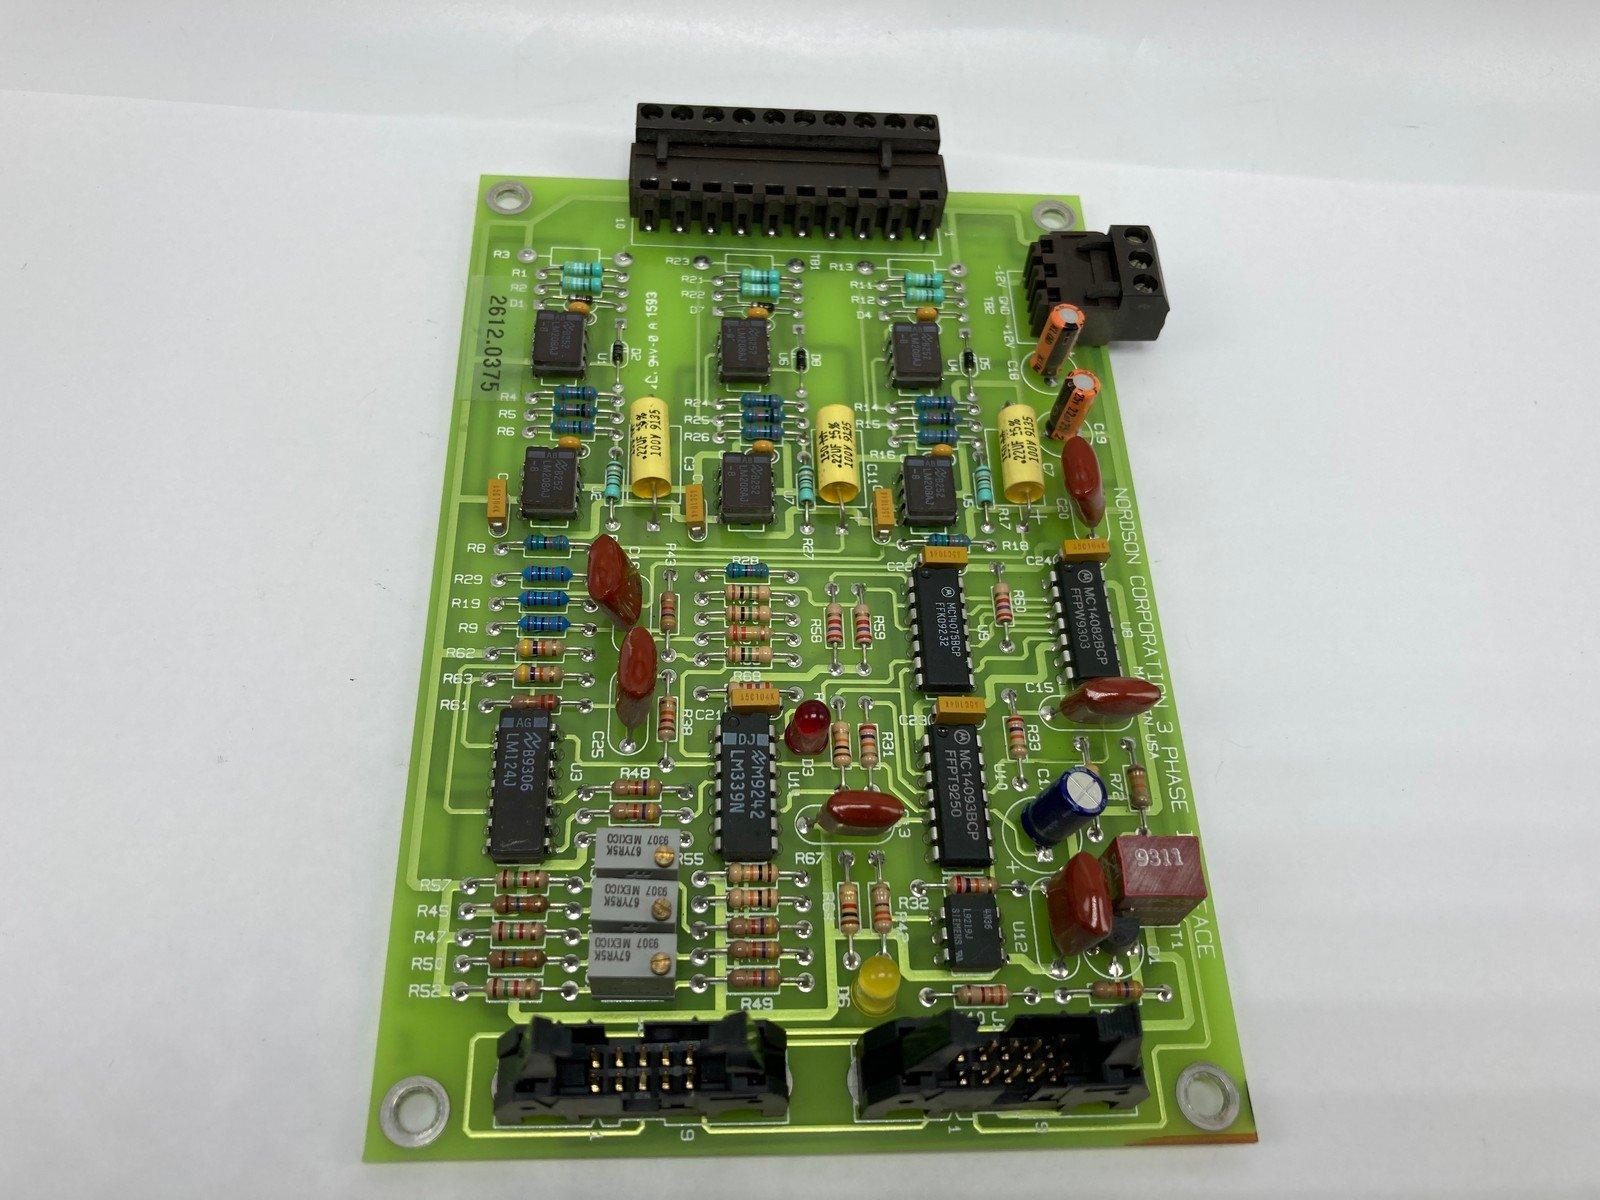   126716 HOT MELT PLC CIRCUIT BOARD 3 PHASE INTERFACE TESTED 